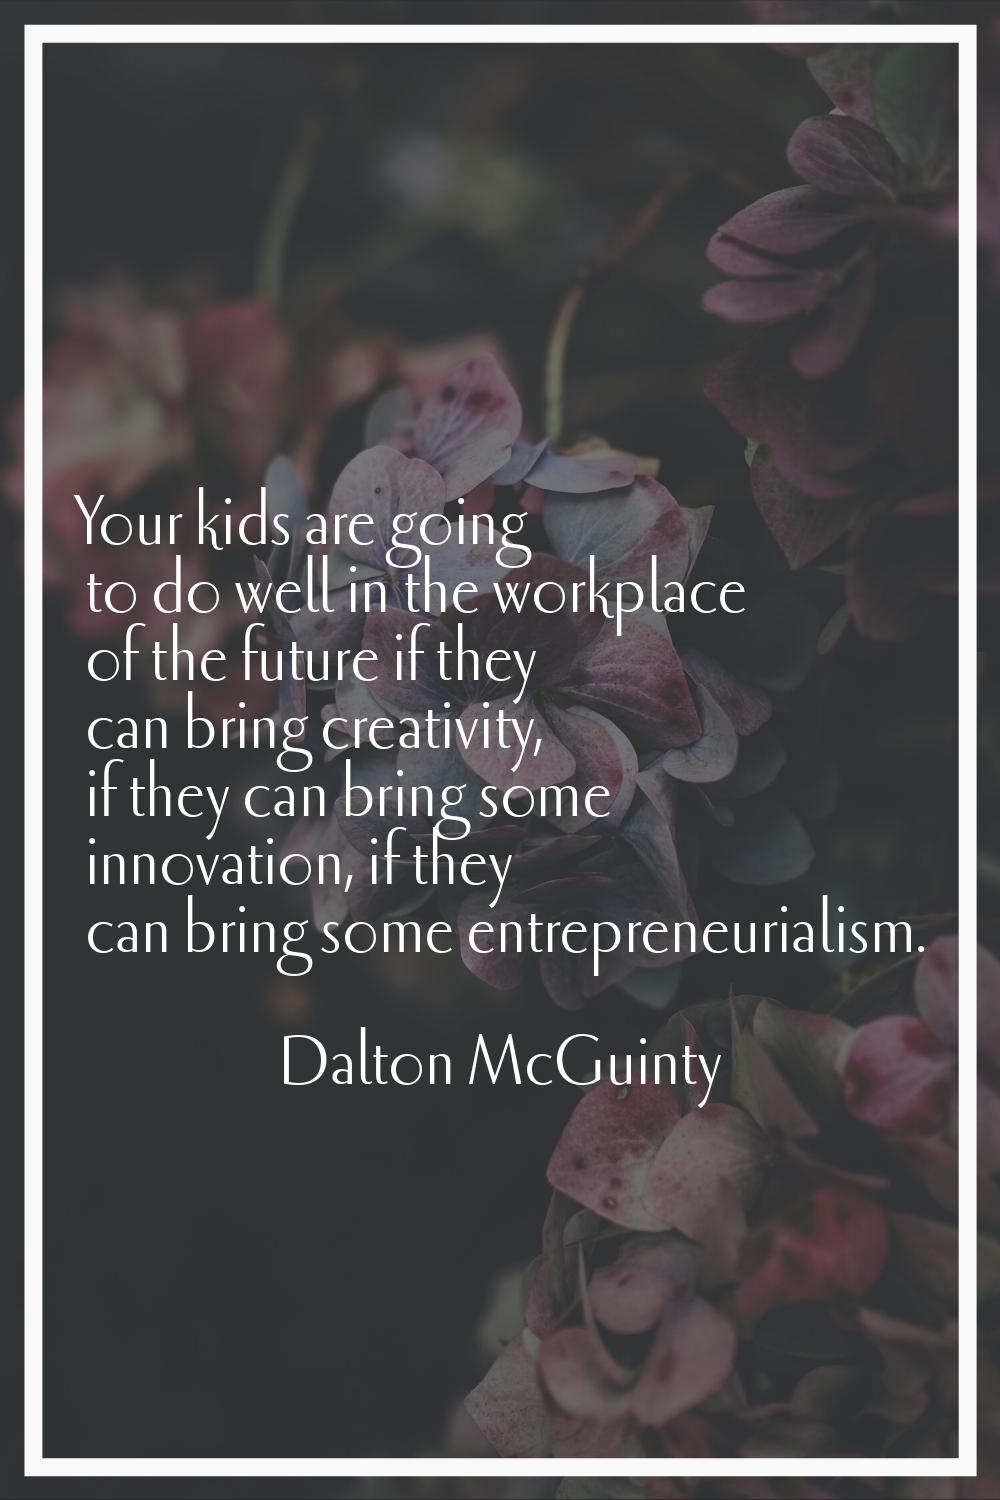 Your kids are going to do well in the workplace of the future if they can bring creativity, if they